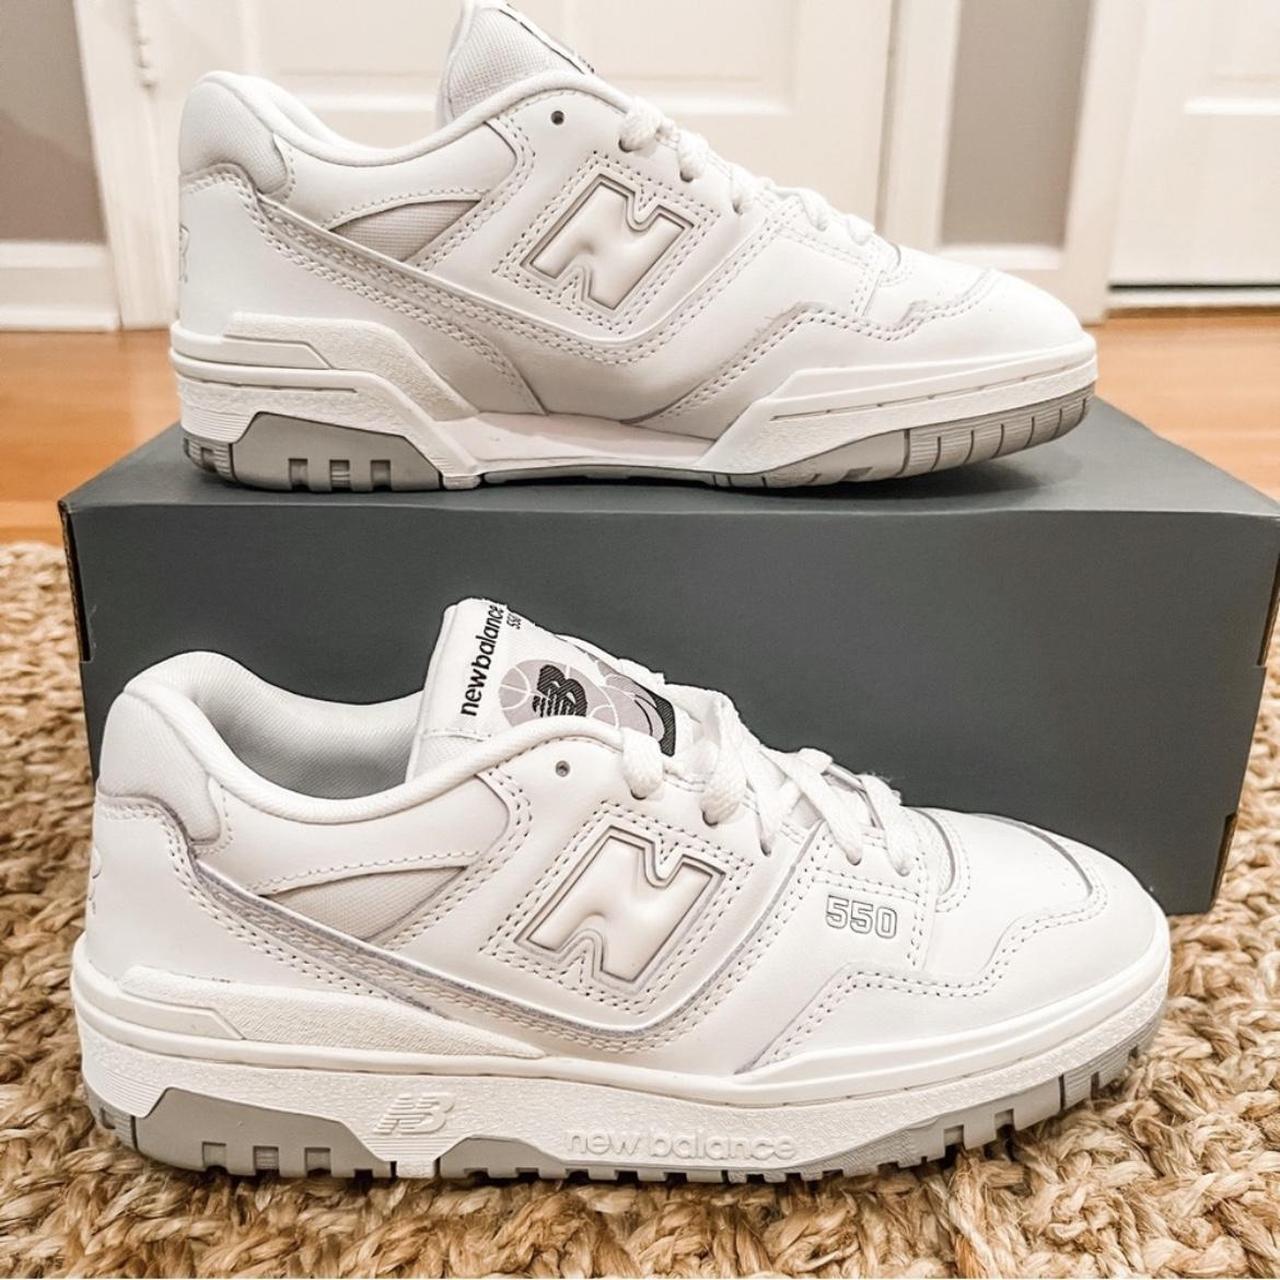 New Balance Women's White and Grey Trainers | Depop